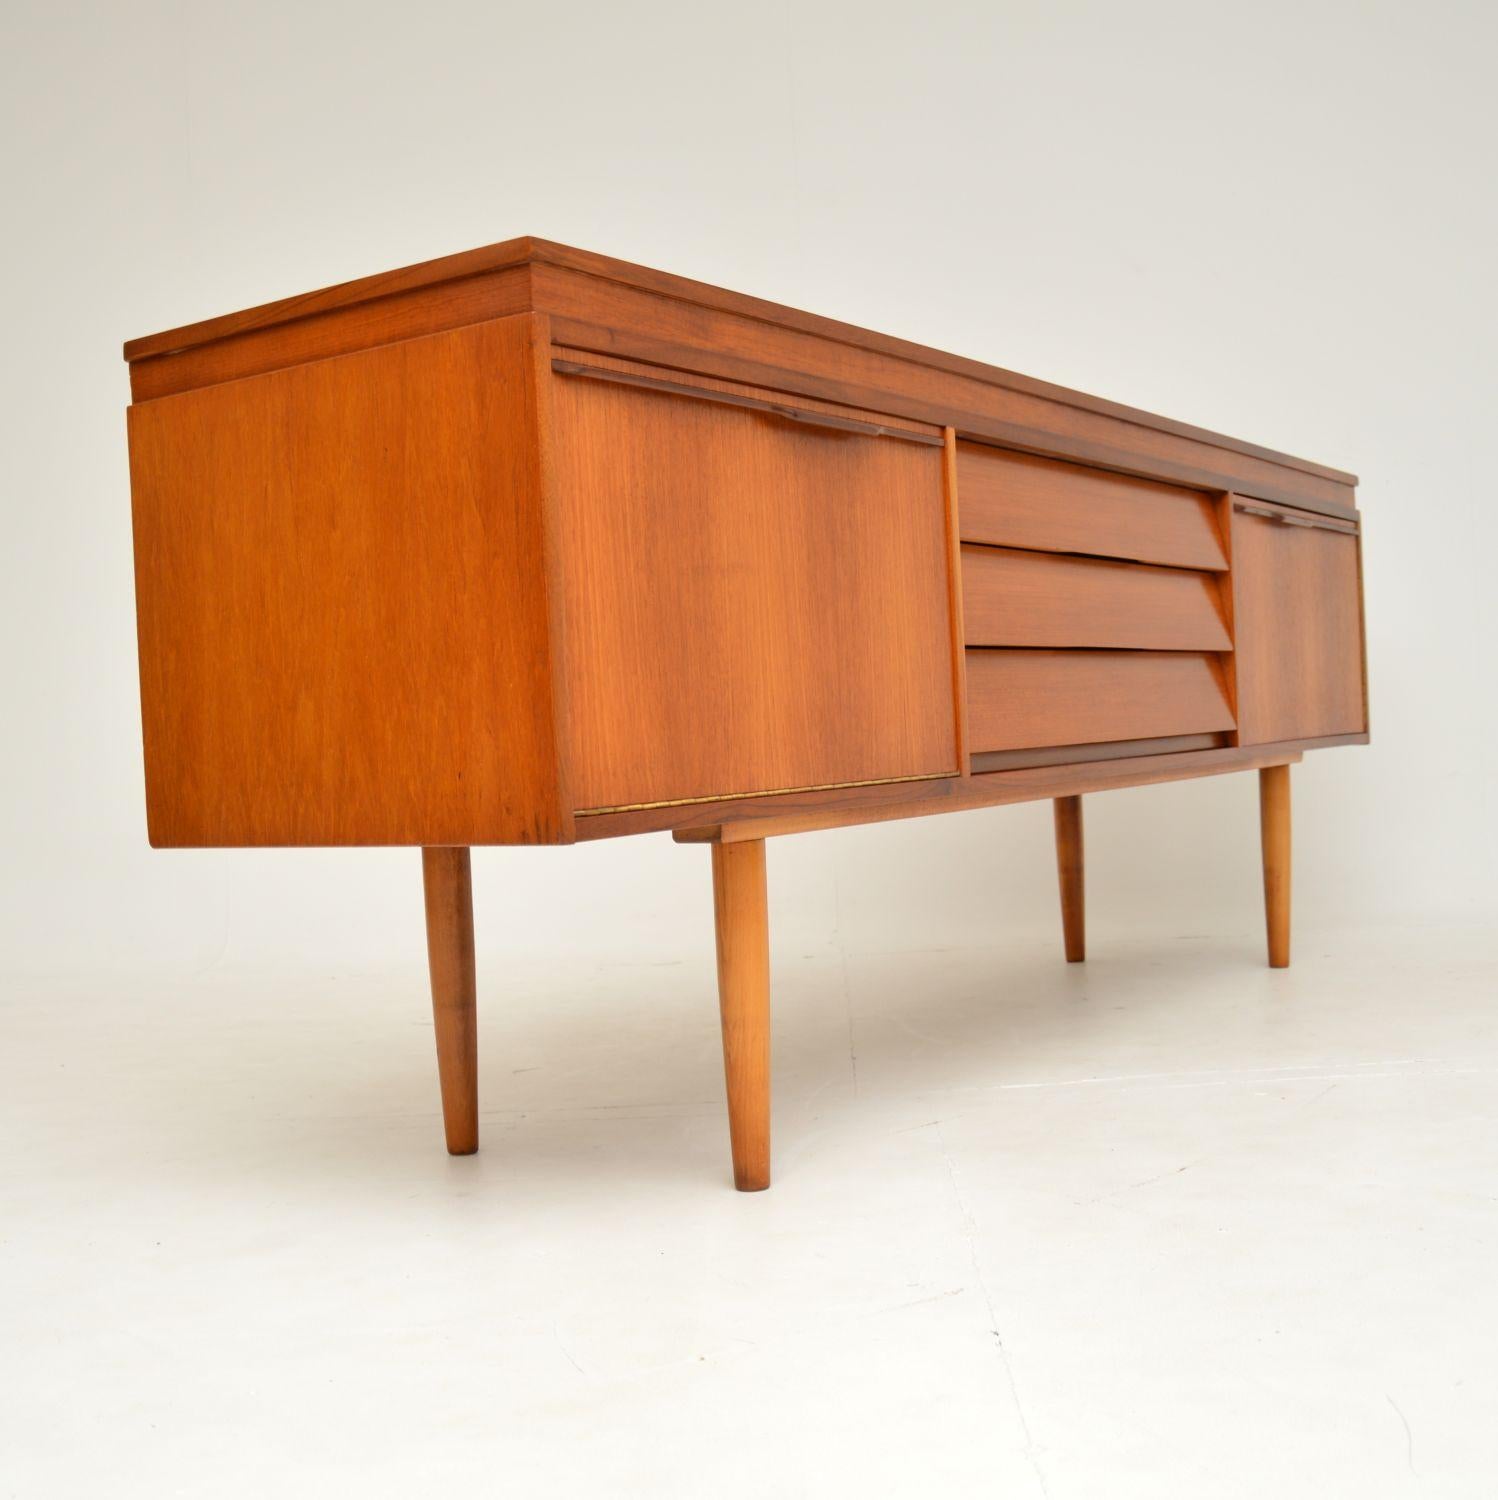 1960's Teak Vintage Sideboard In Good Condition For Sale In London, GB